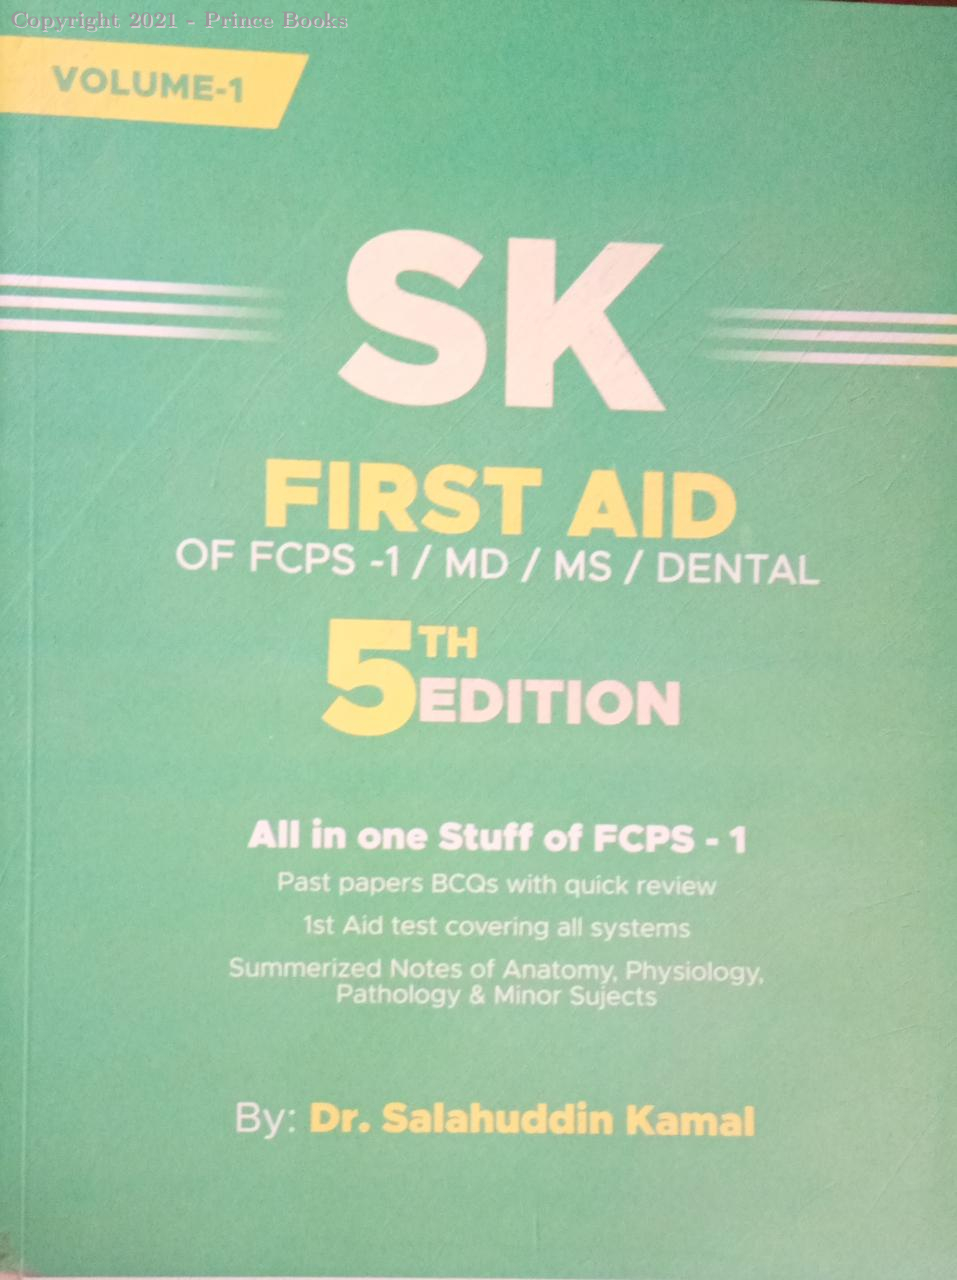 SK first aid of fcps-1/md/ms/ dental, 5e